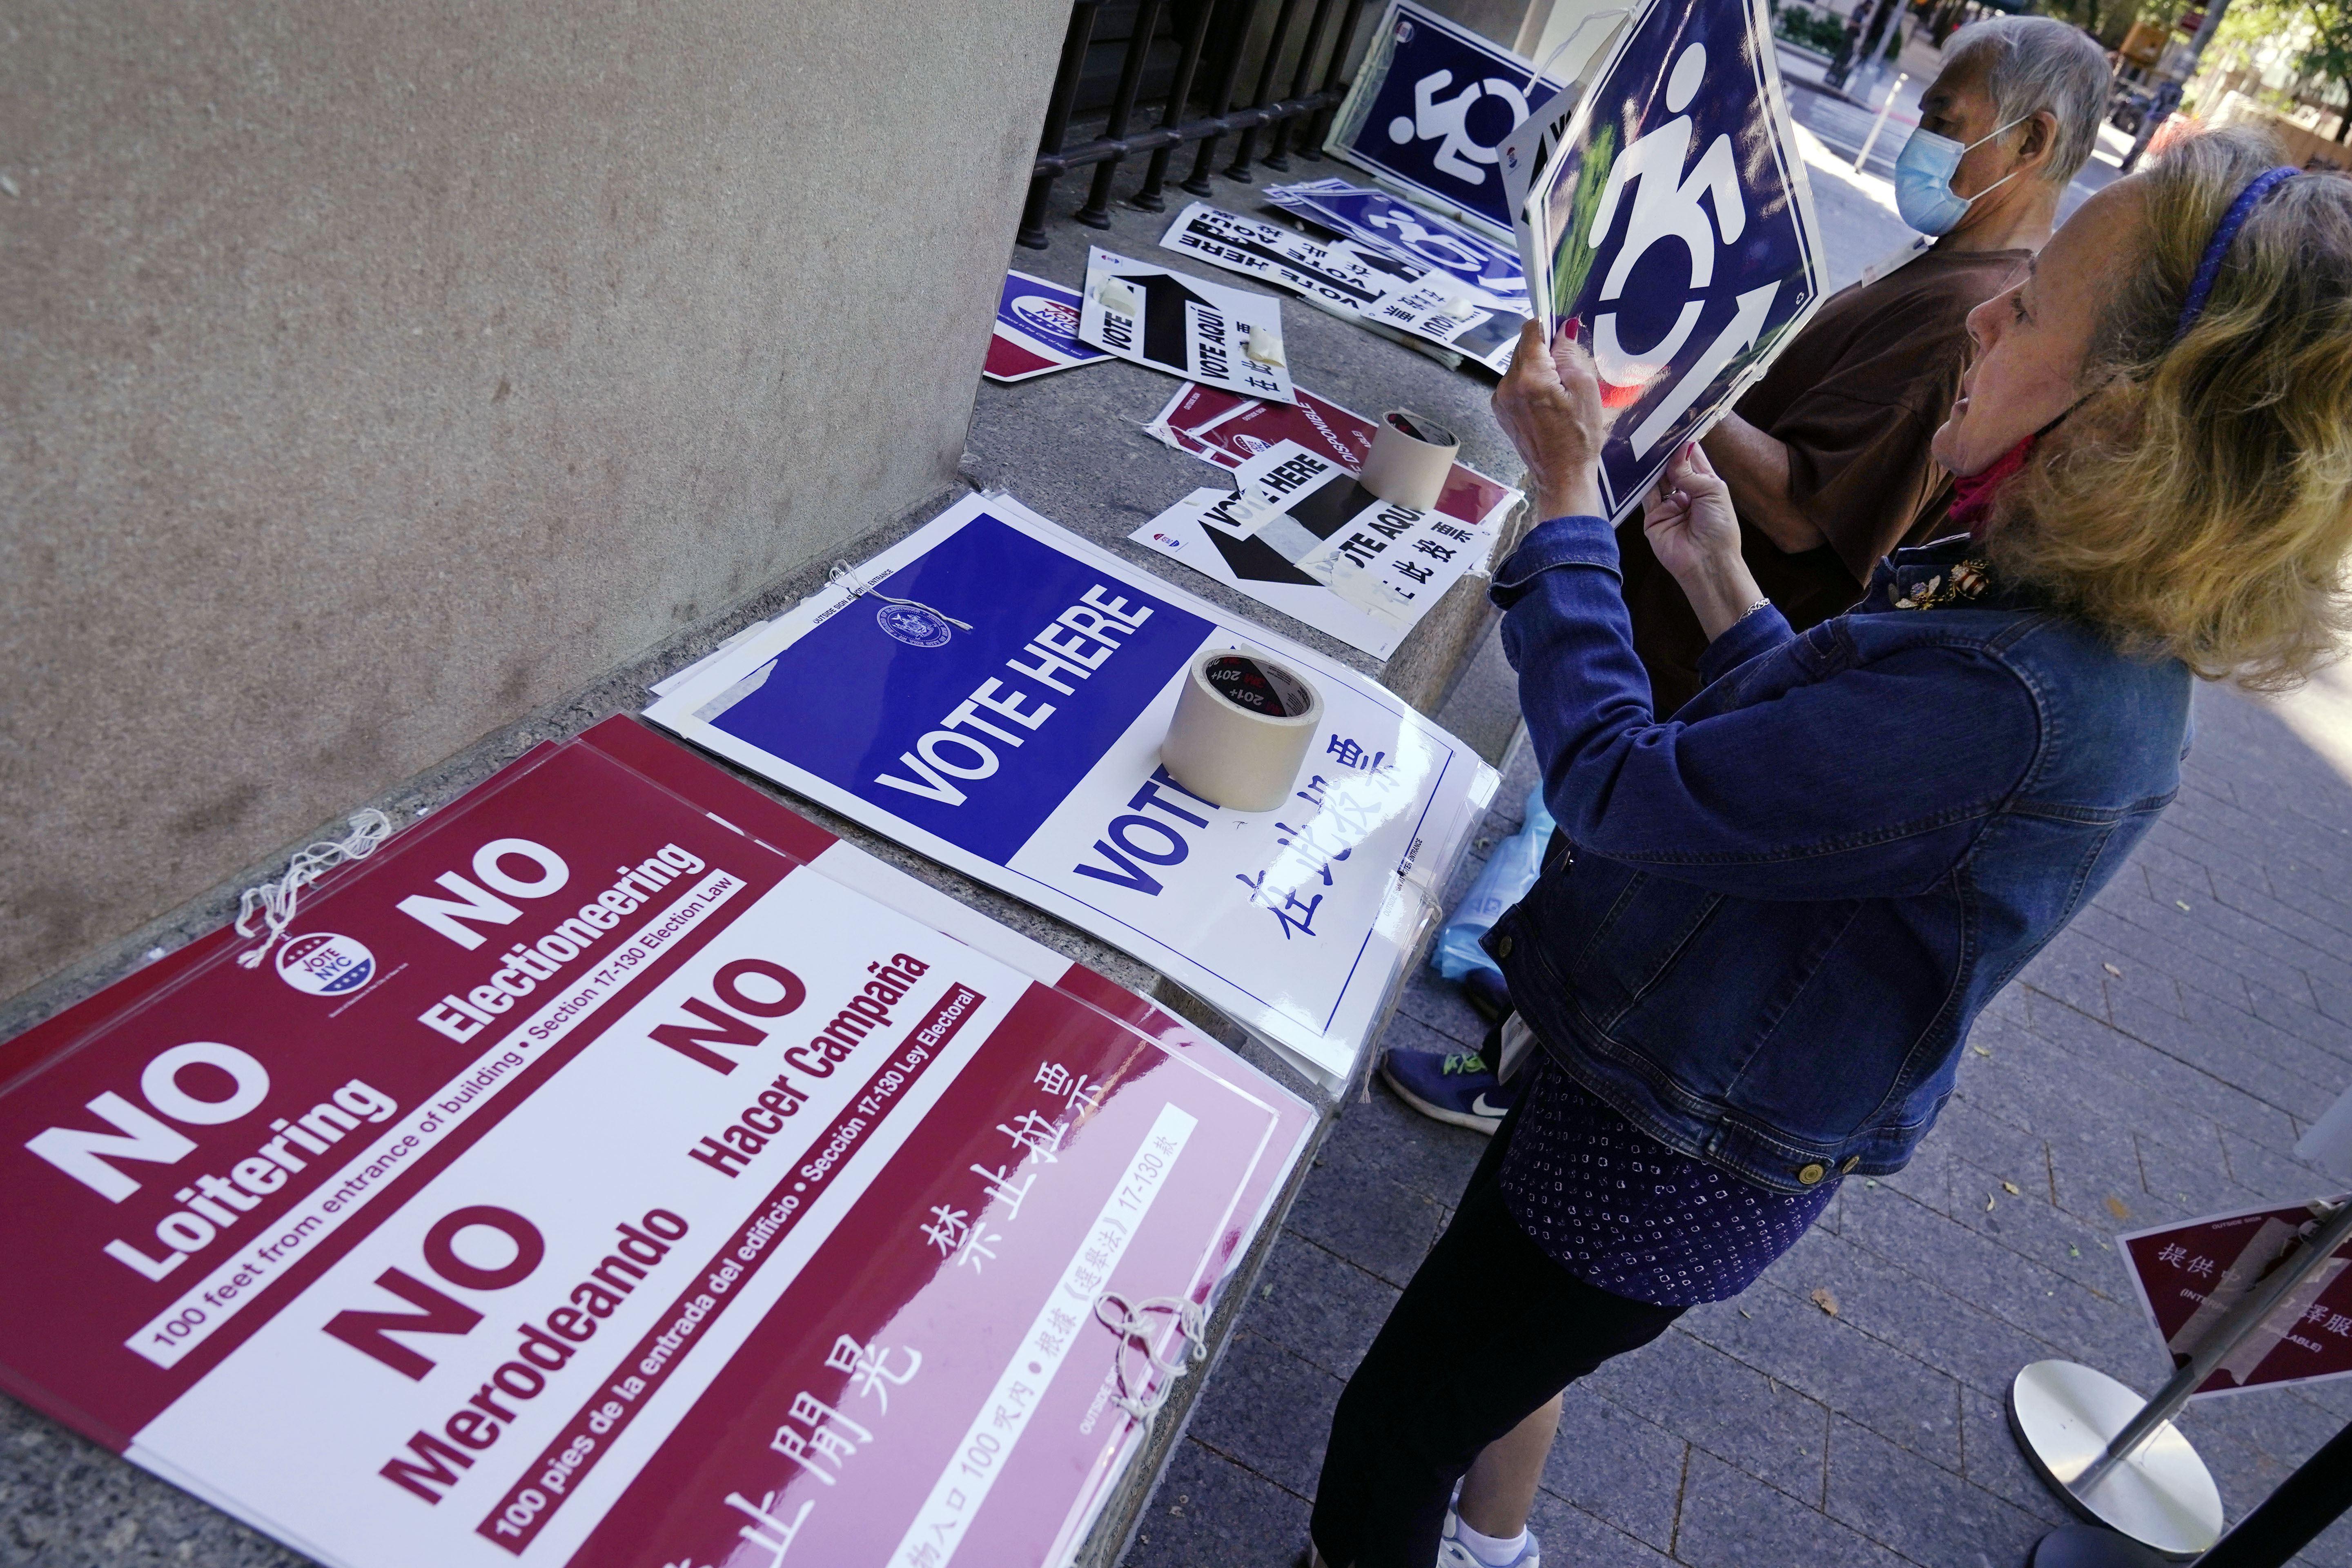 A worker prepares direction signs outside the early voting site at the Metropolitan Museum of Art, in New York, Thursday, June 17, 2021. (AP Photo/Richard Drew)